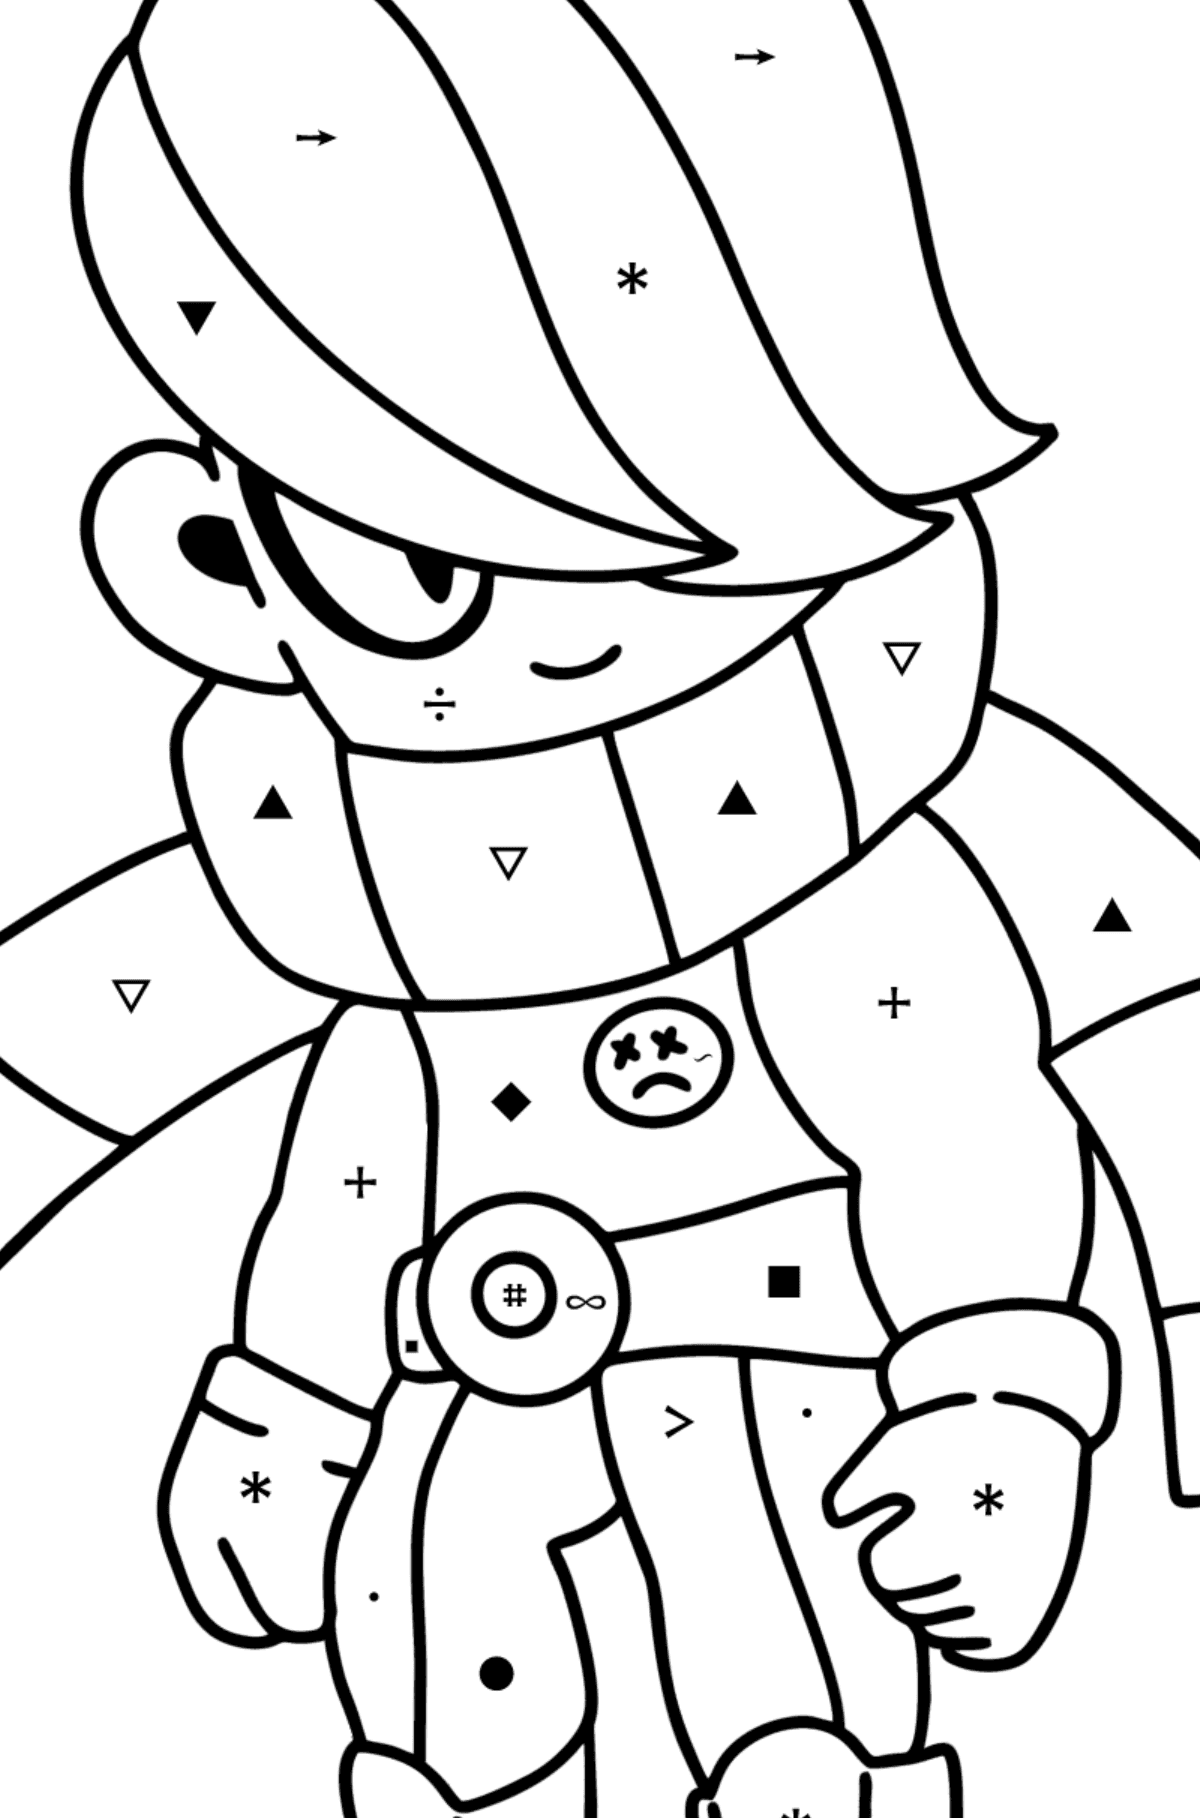 Brawl Stars Edgar coloring page - Coloring by Symbols for Kids